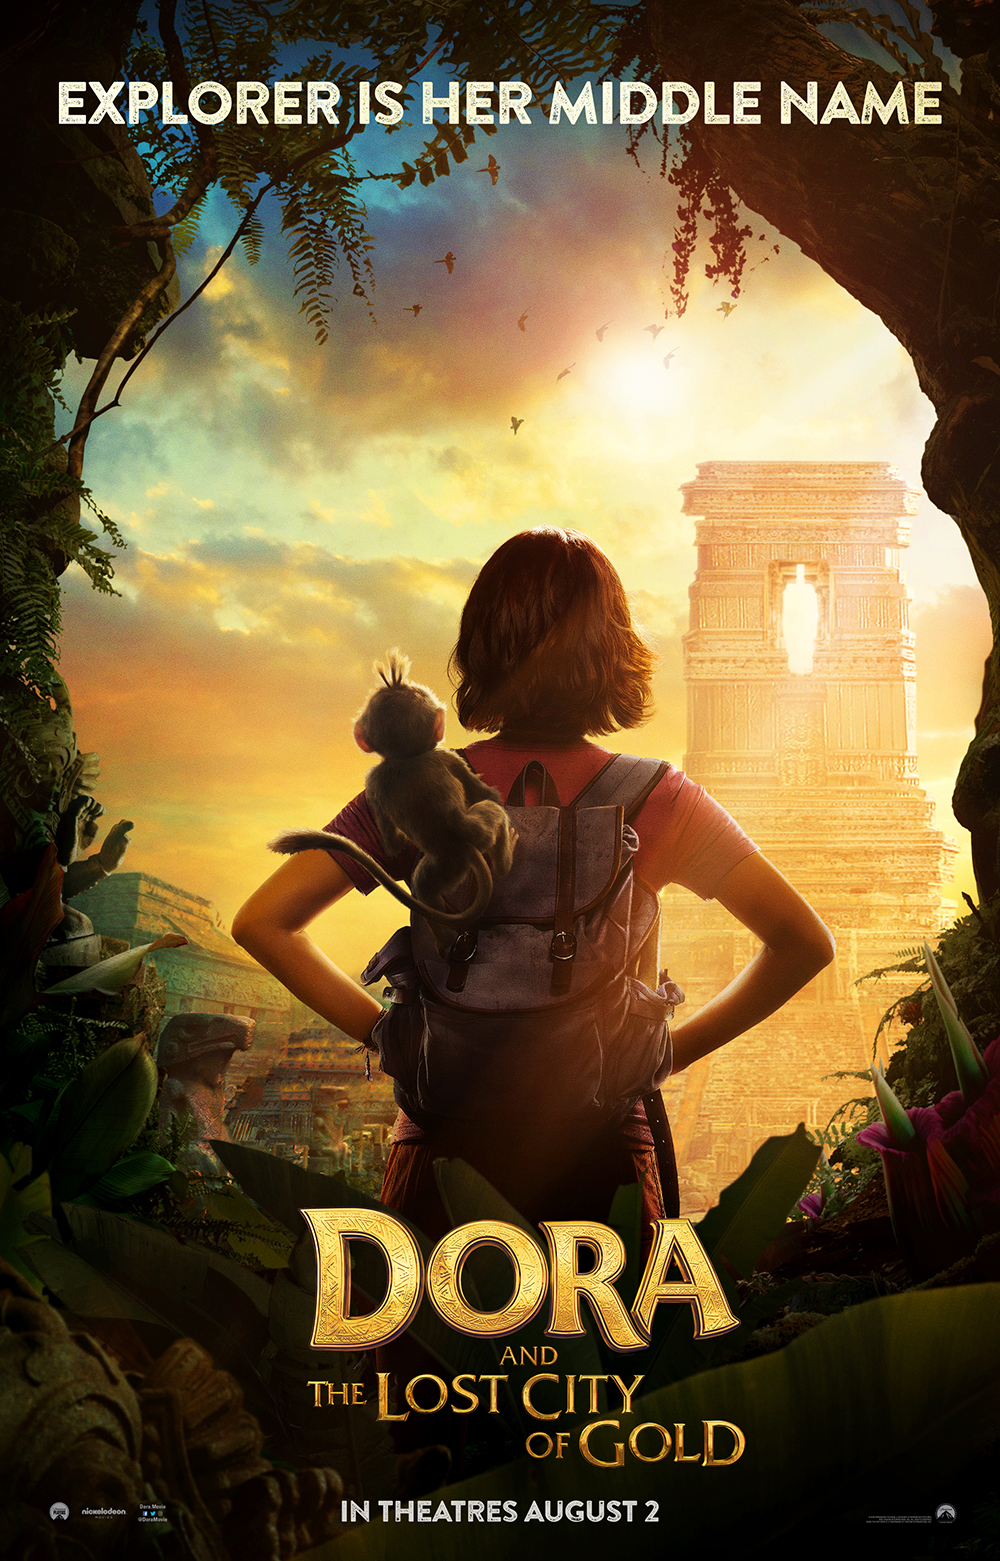 dora-and-the-lost-city-of-gold-teaser-poster